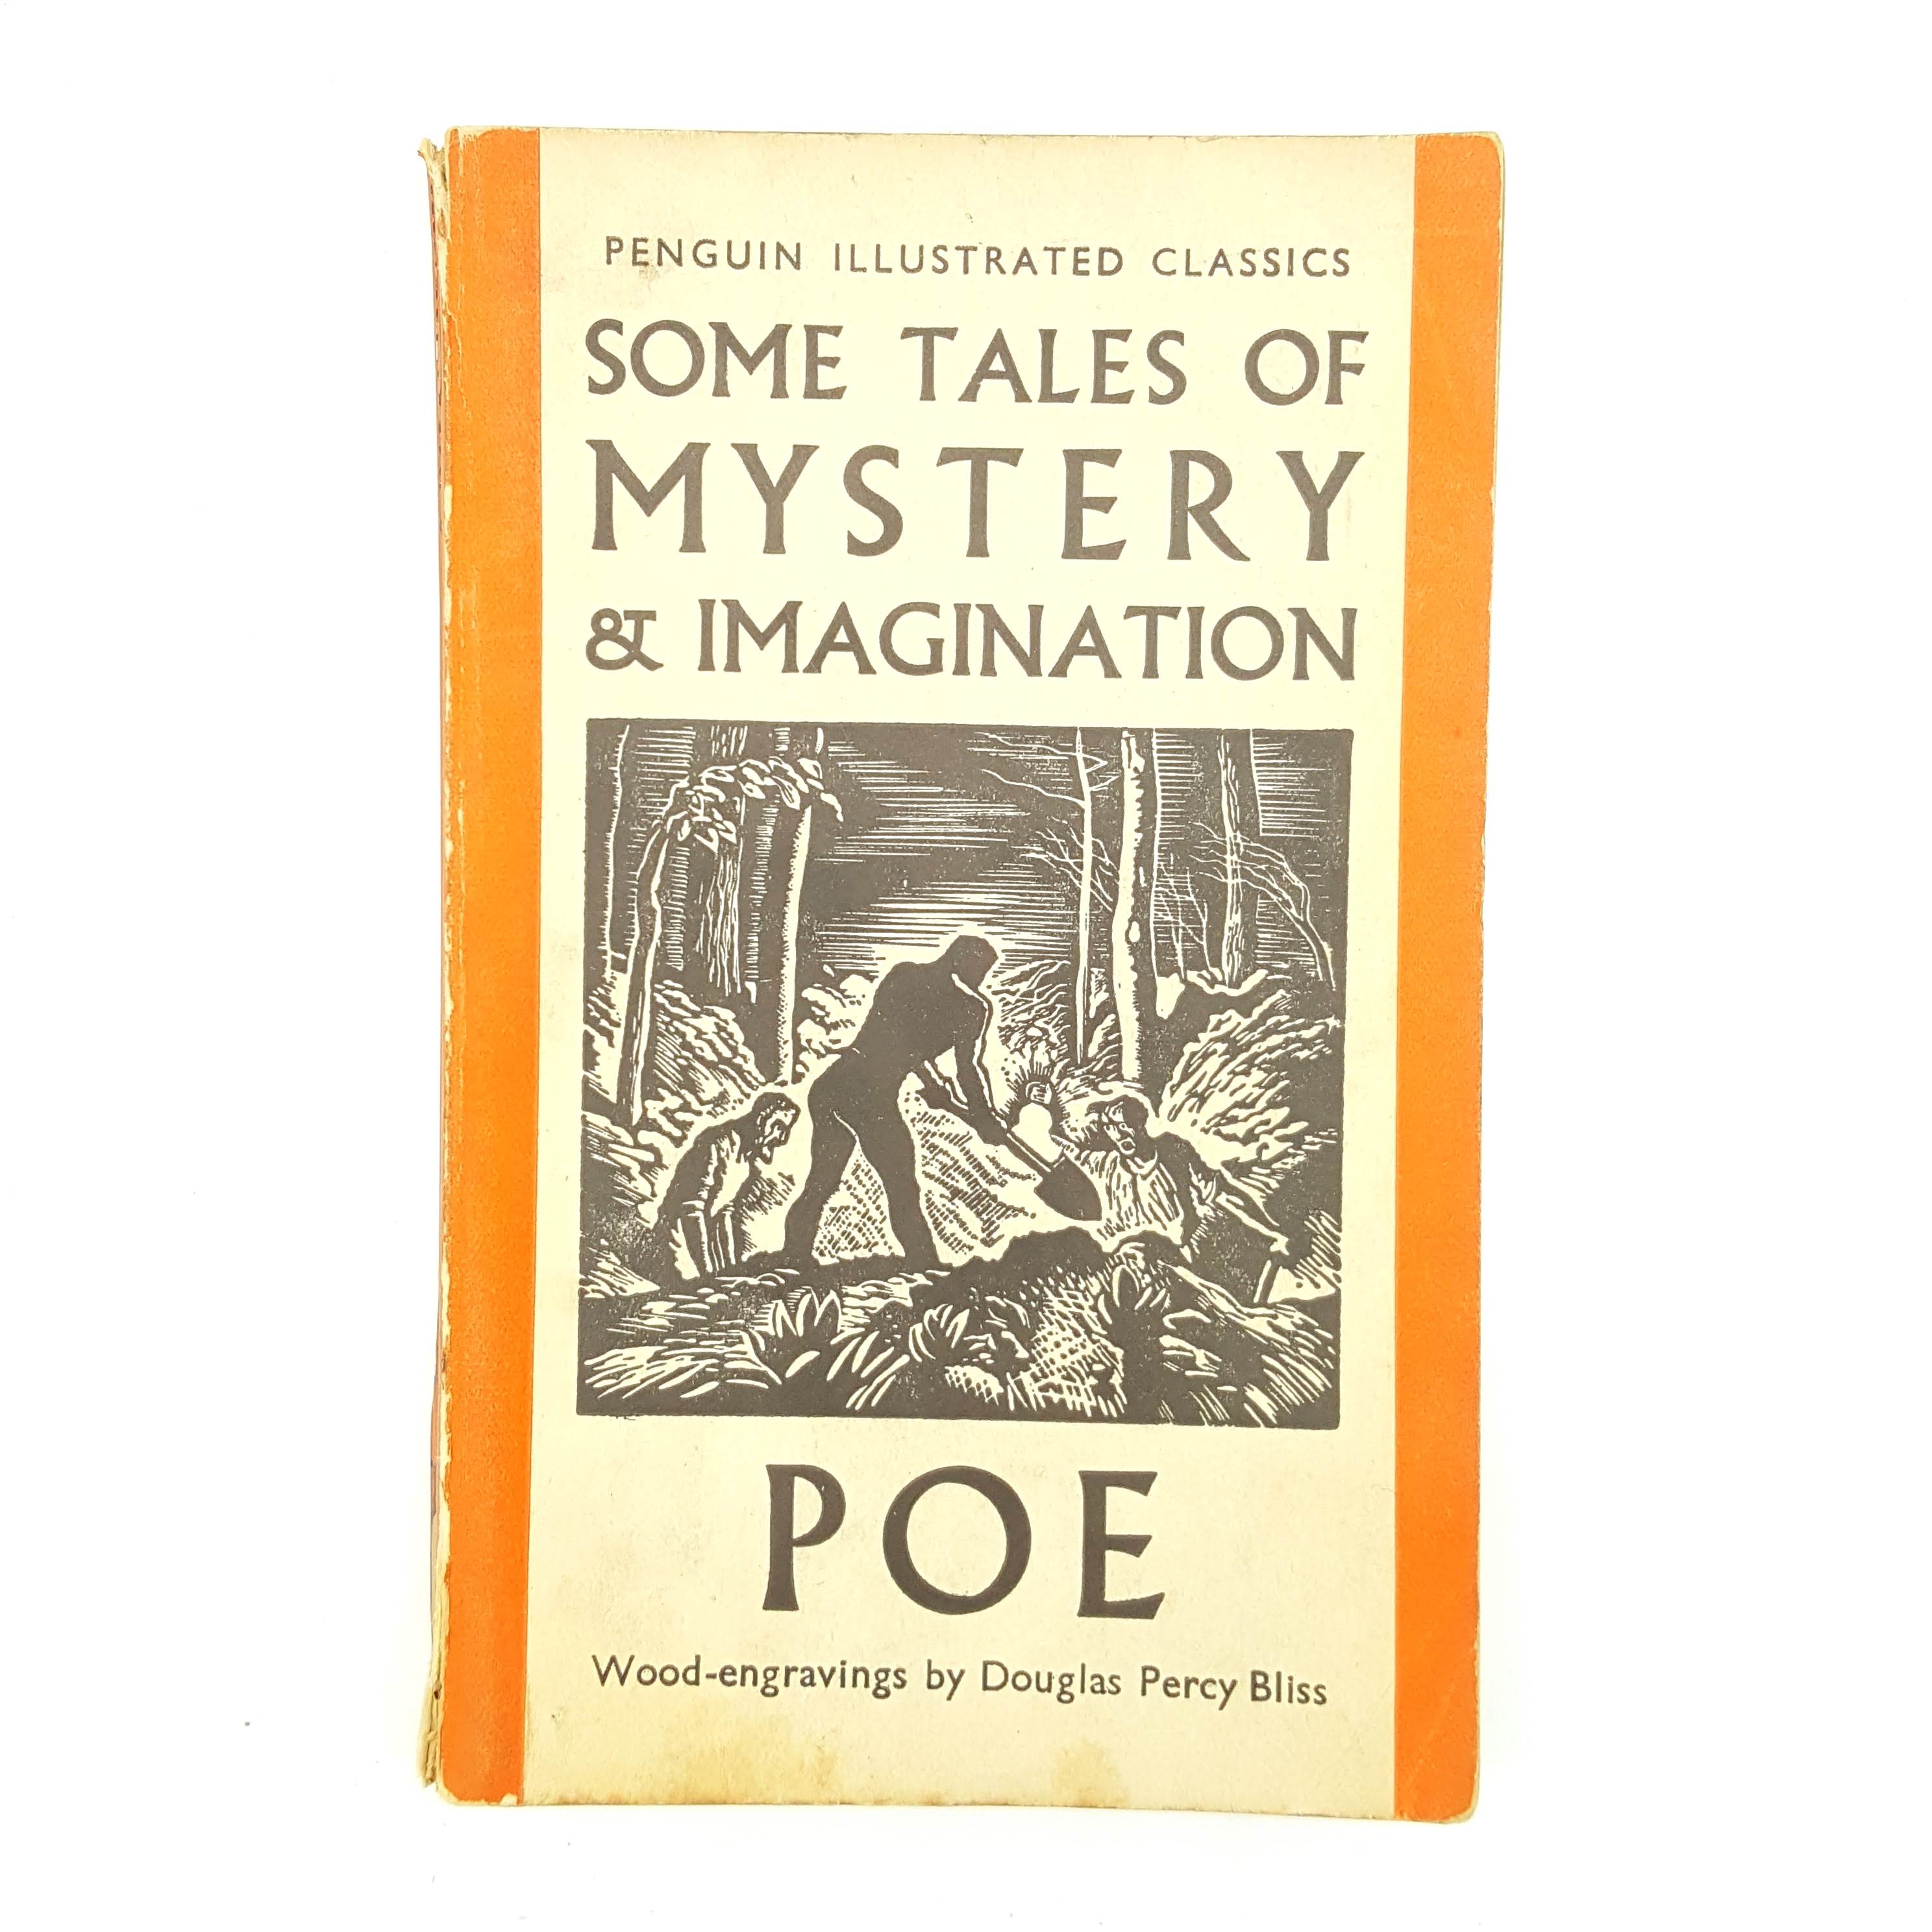 EDGAR ALLAN POE'S SOME TALES OF MYSTERY & IMAGINATION 1938